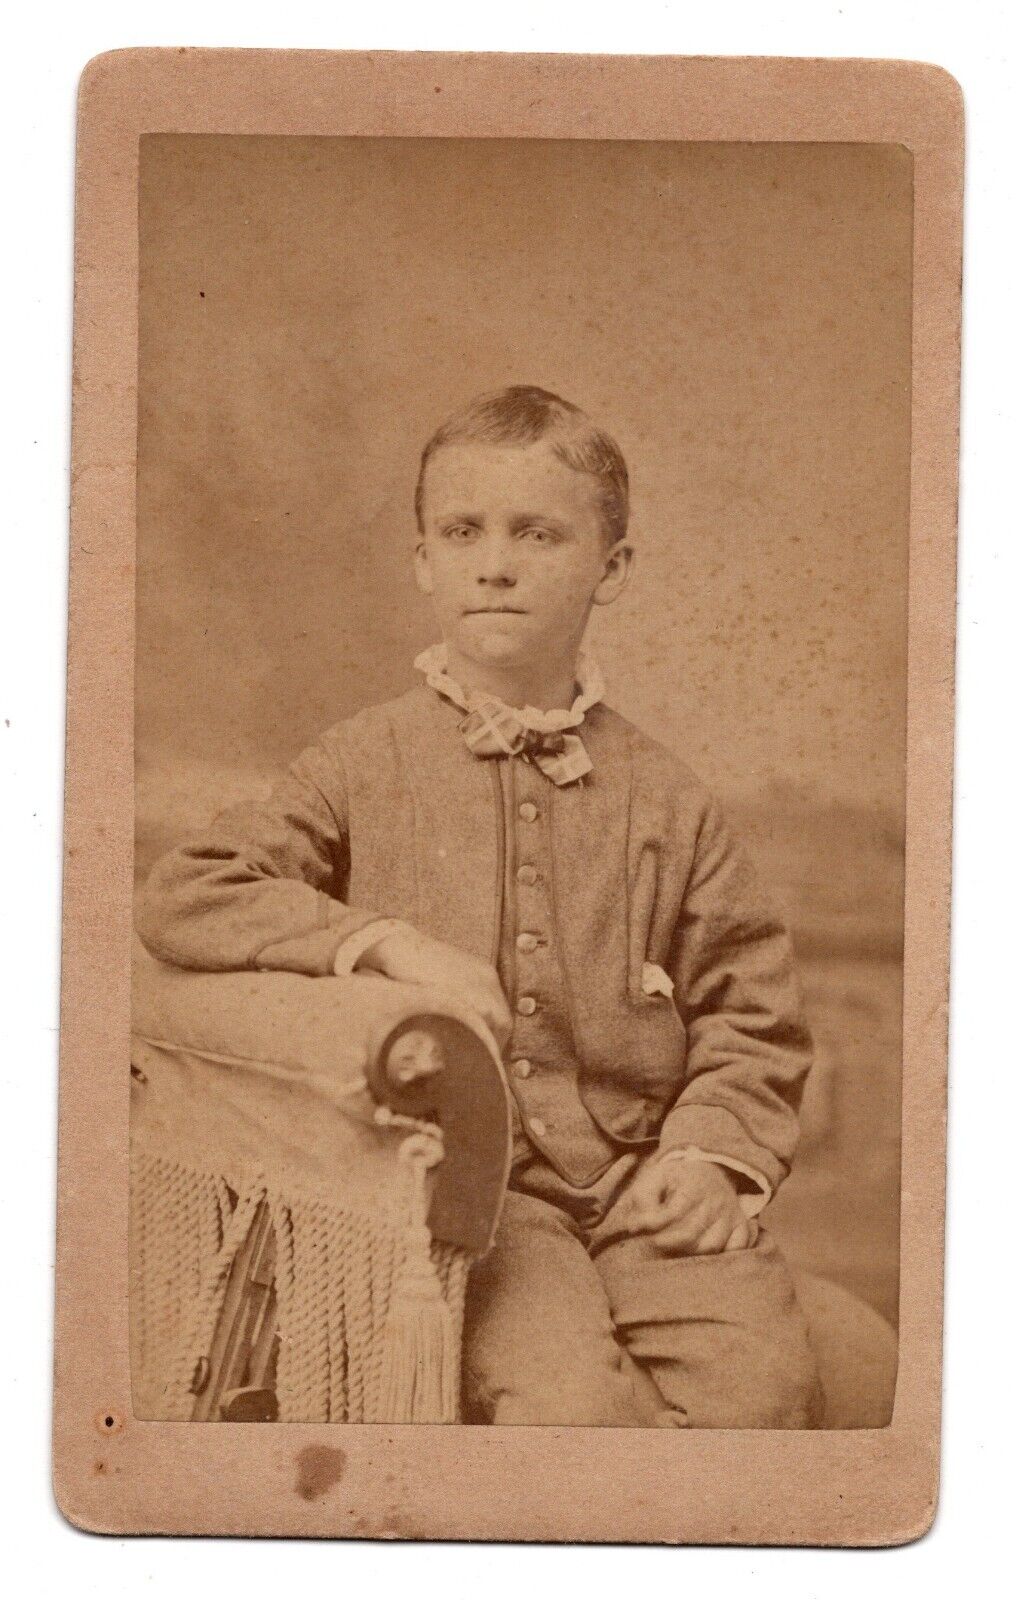 1776 CDV DAN. W. SMITH HANDSOME YOUNG BOY IN SUIT ELKHART INDIANA